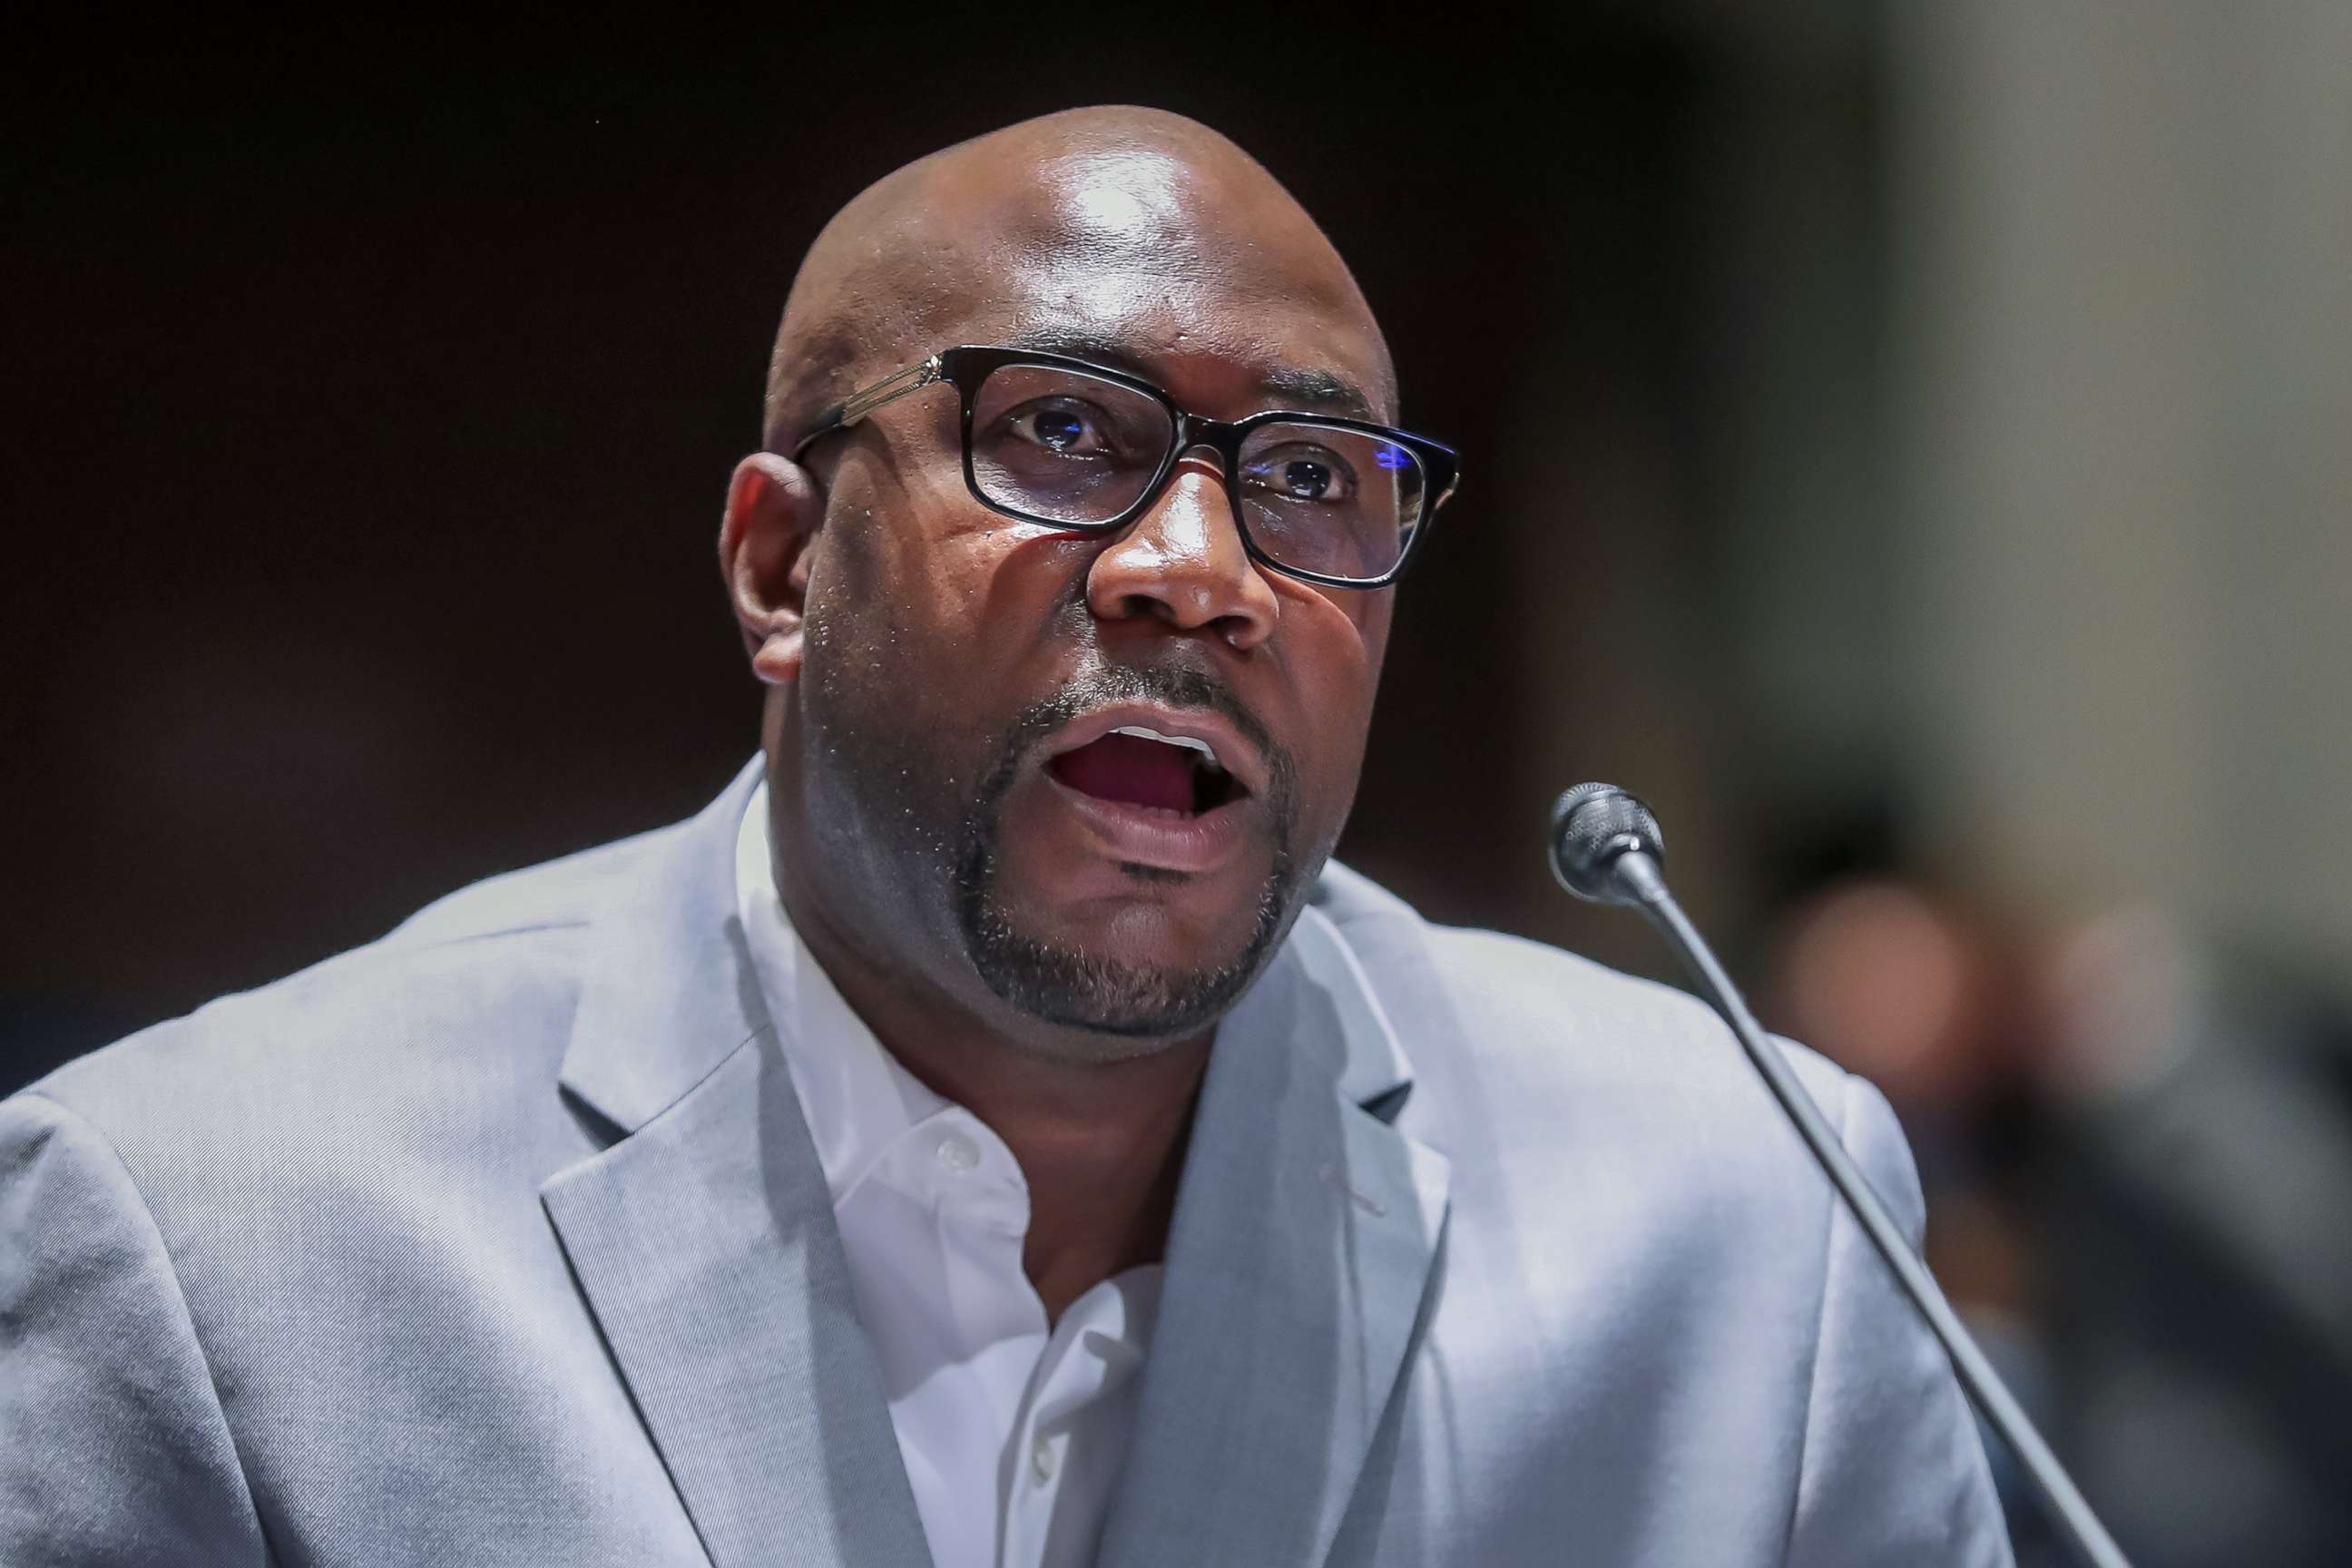 PHOTO: Philonise Floyd, brother of George Floyd, gives his opening statement during the House Judiciary Committee hearing on Policing Practices and Law Enforcement Accountability at the U.S. Capitol, June 10, 2020, in Washington, D.C.